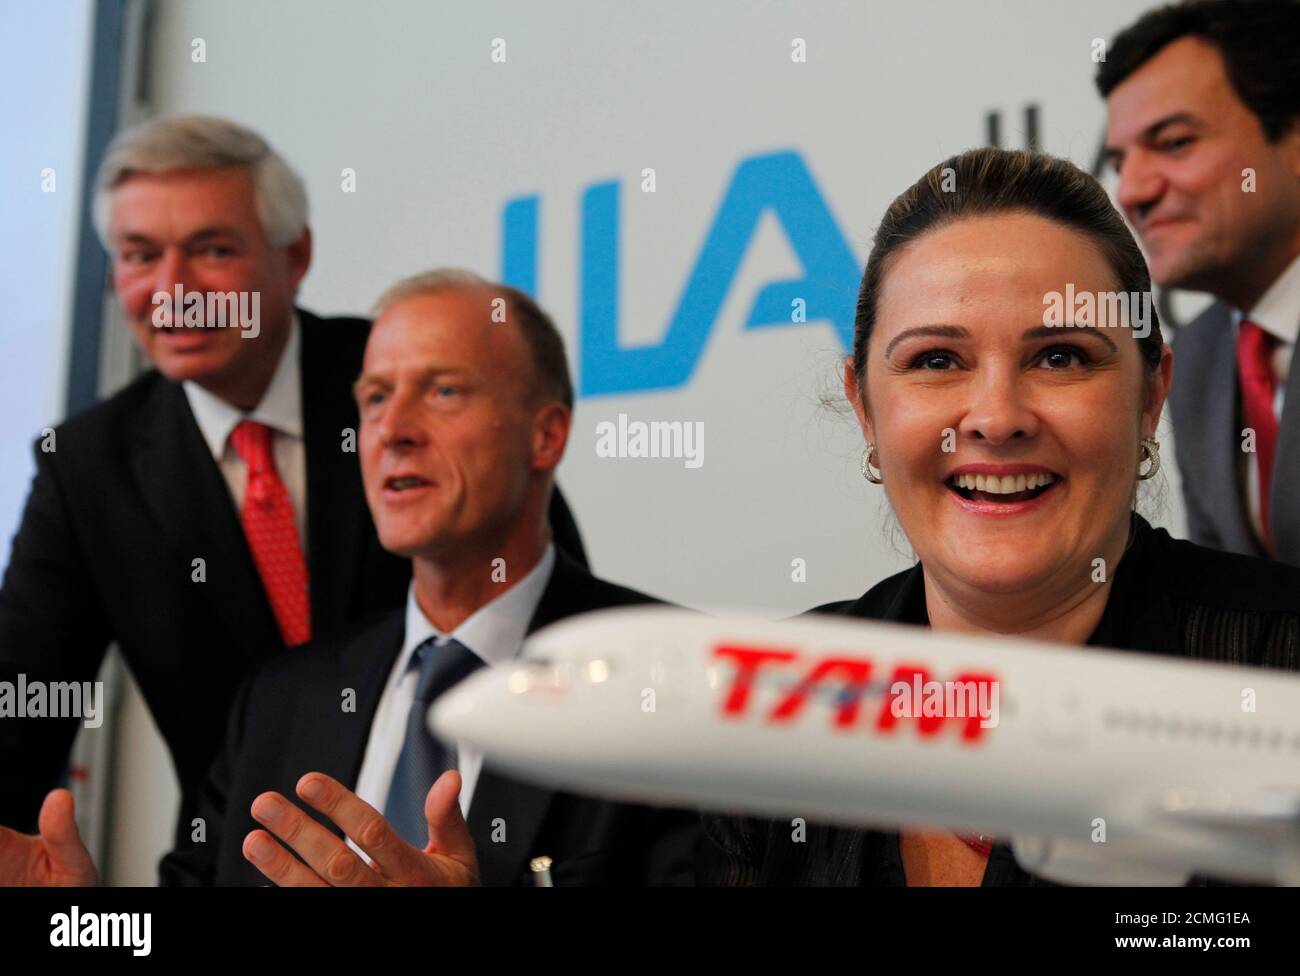 Airbus President and Chief Executive Tom Enders (2nd L) and Airbus Chief Operating Officer John Leahy (L) attend a news conference with Maria Claudia Amaro (2nd R) and Libano Barroso of Brazilian carrier TAM after signing documents at the ILA International Air Show in Schoenefeld outside Berlin, June 8, 2010. Brazil's largest air carrier, is poised to order Airbus aircraft worth just under $3 billion at the Berlin air show on Tuesday, a source familiar with the deal told Reuters.  REUTERS/Thomas Peter  (GERMANY - Tags: TRANSPORT BUSINESS) Stock Photo